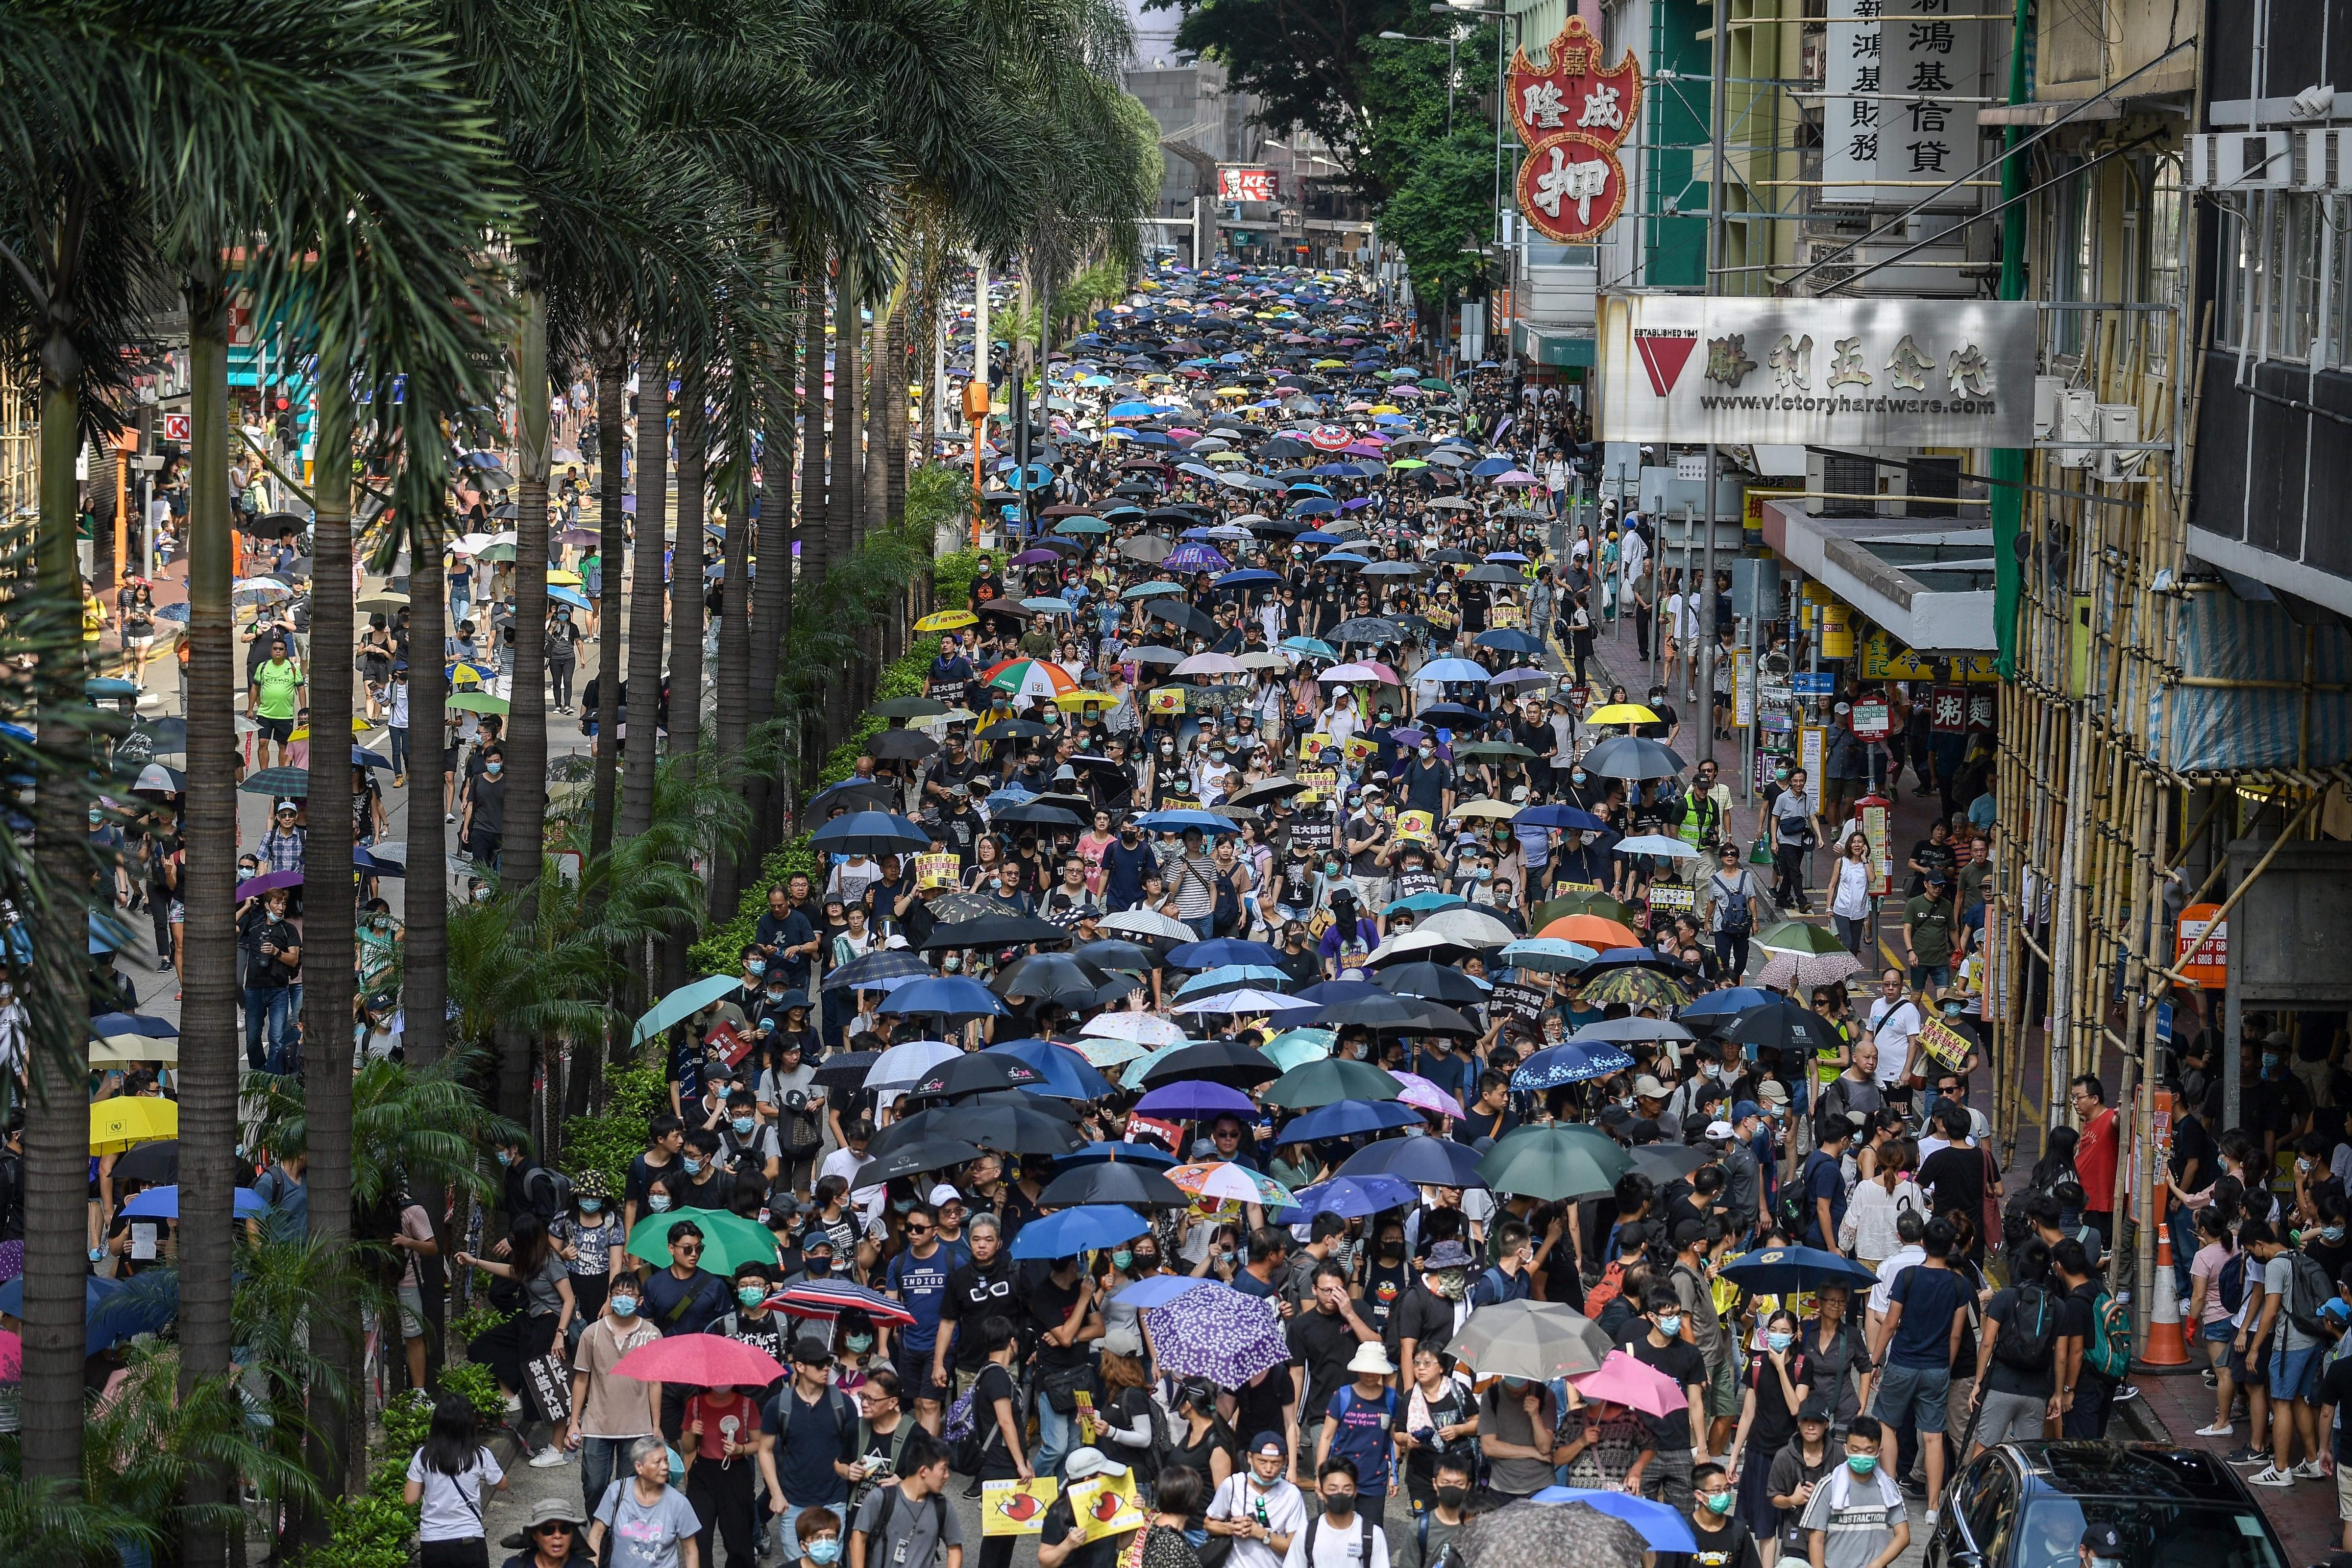 Protesters attend a pro-democracy march in Hong Kong on September 15, 2019. (NICOLAS ASFOURI—AFP/Getty Images)